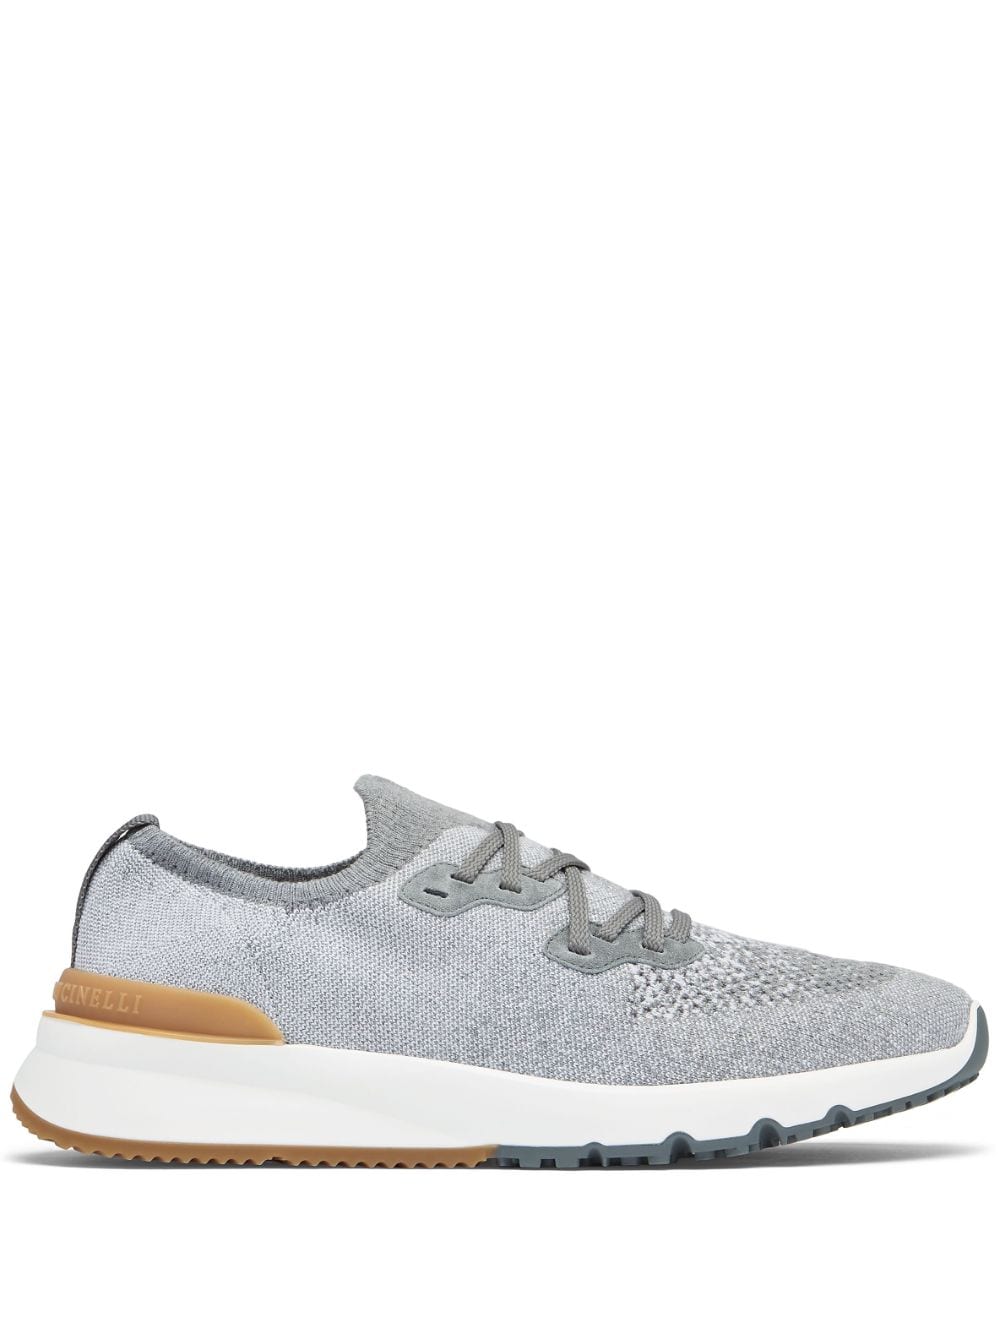 Brunello Cucinelli Men's Heather Grey Knit Sneakers With Mélange Effect And Chunky Rubber Sole In Gray